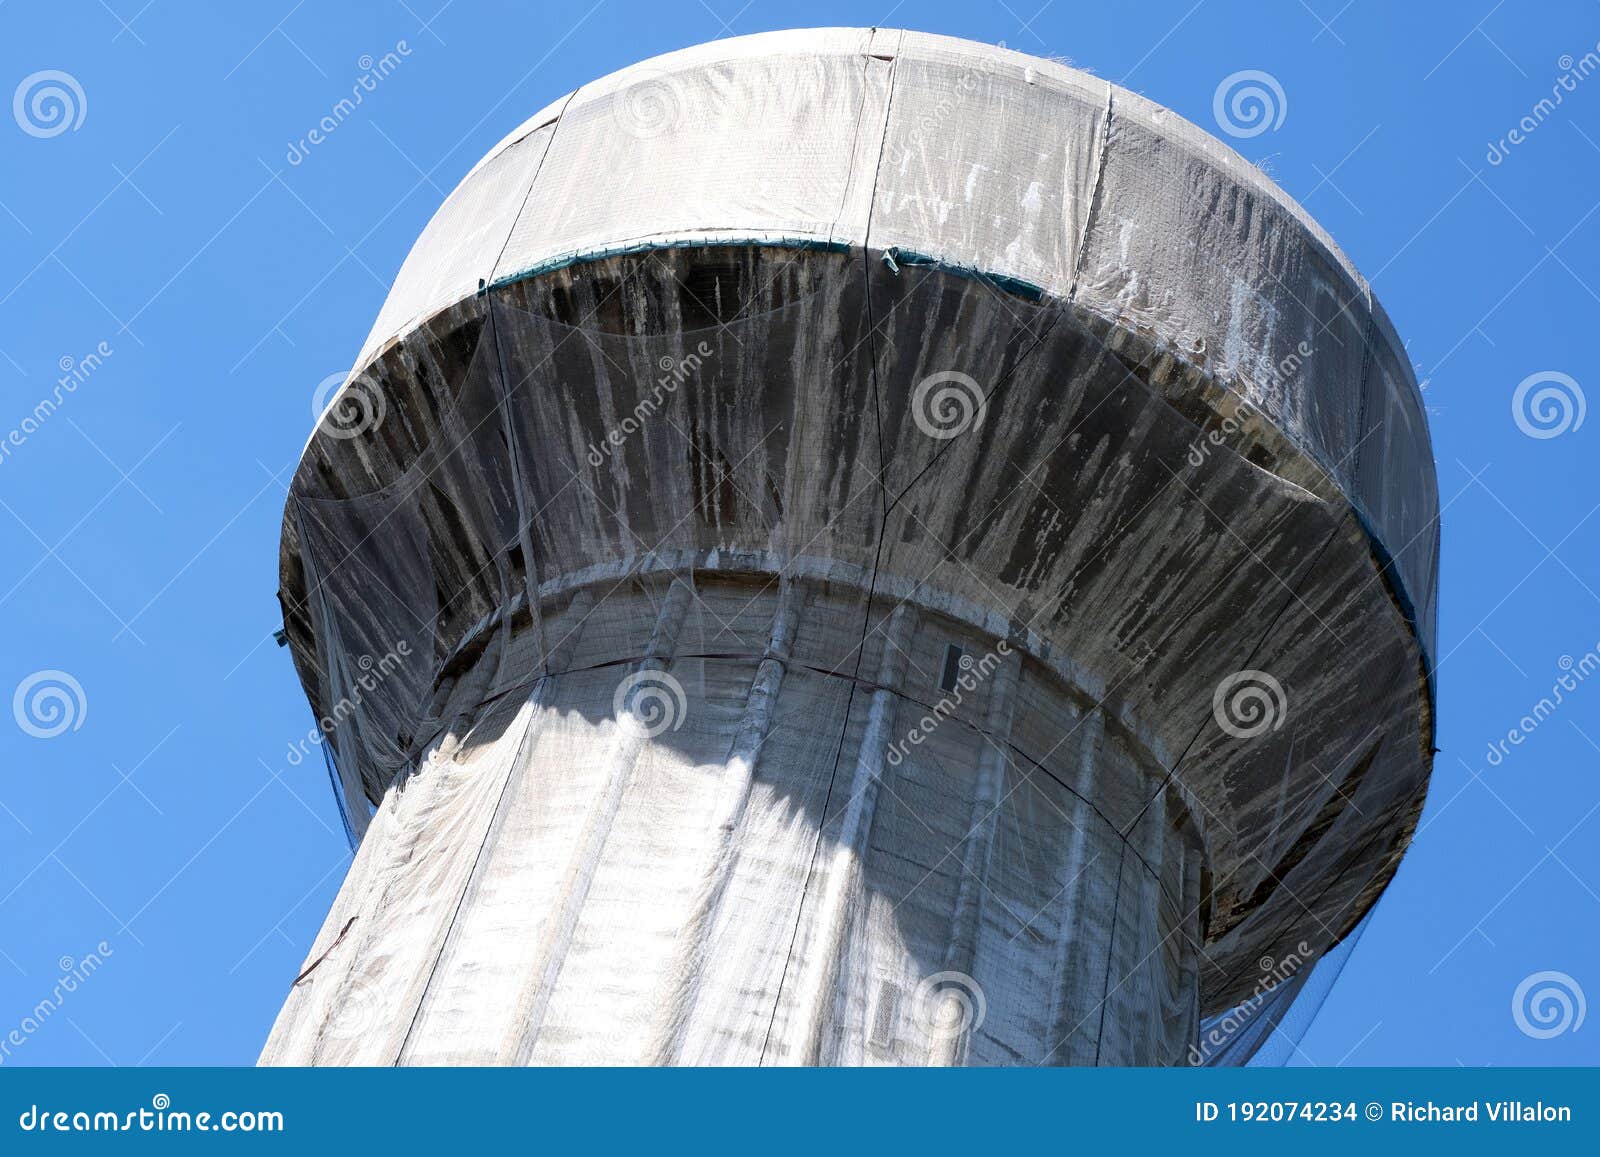 water tower surrounded by a protective net